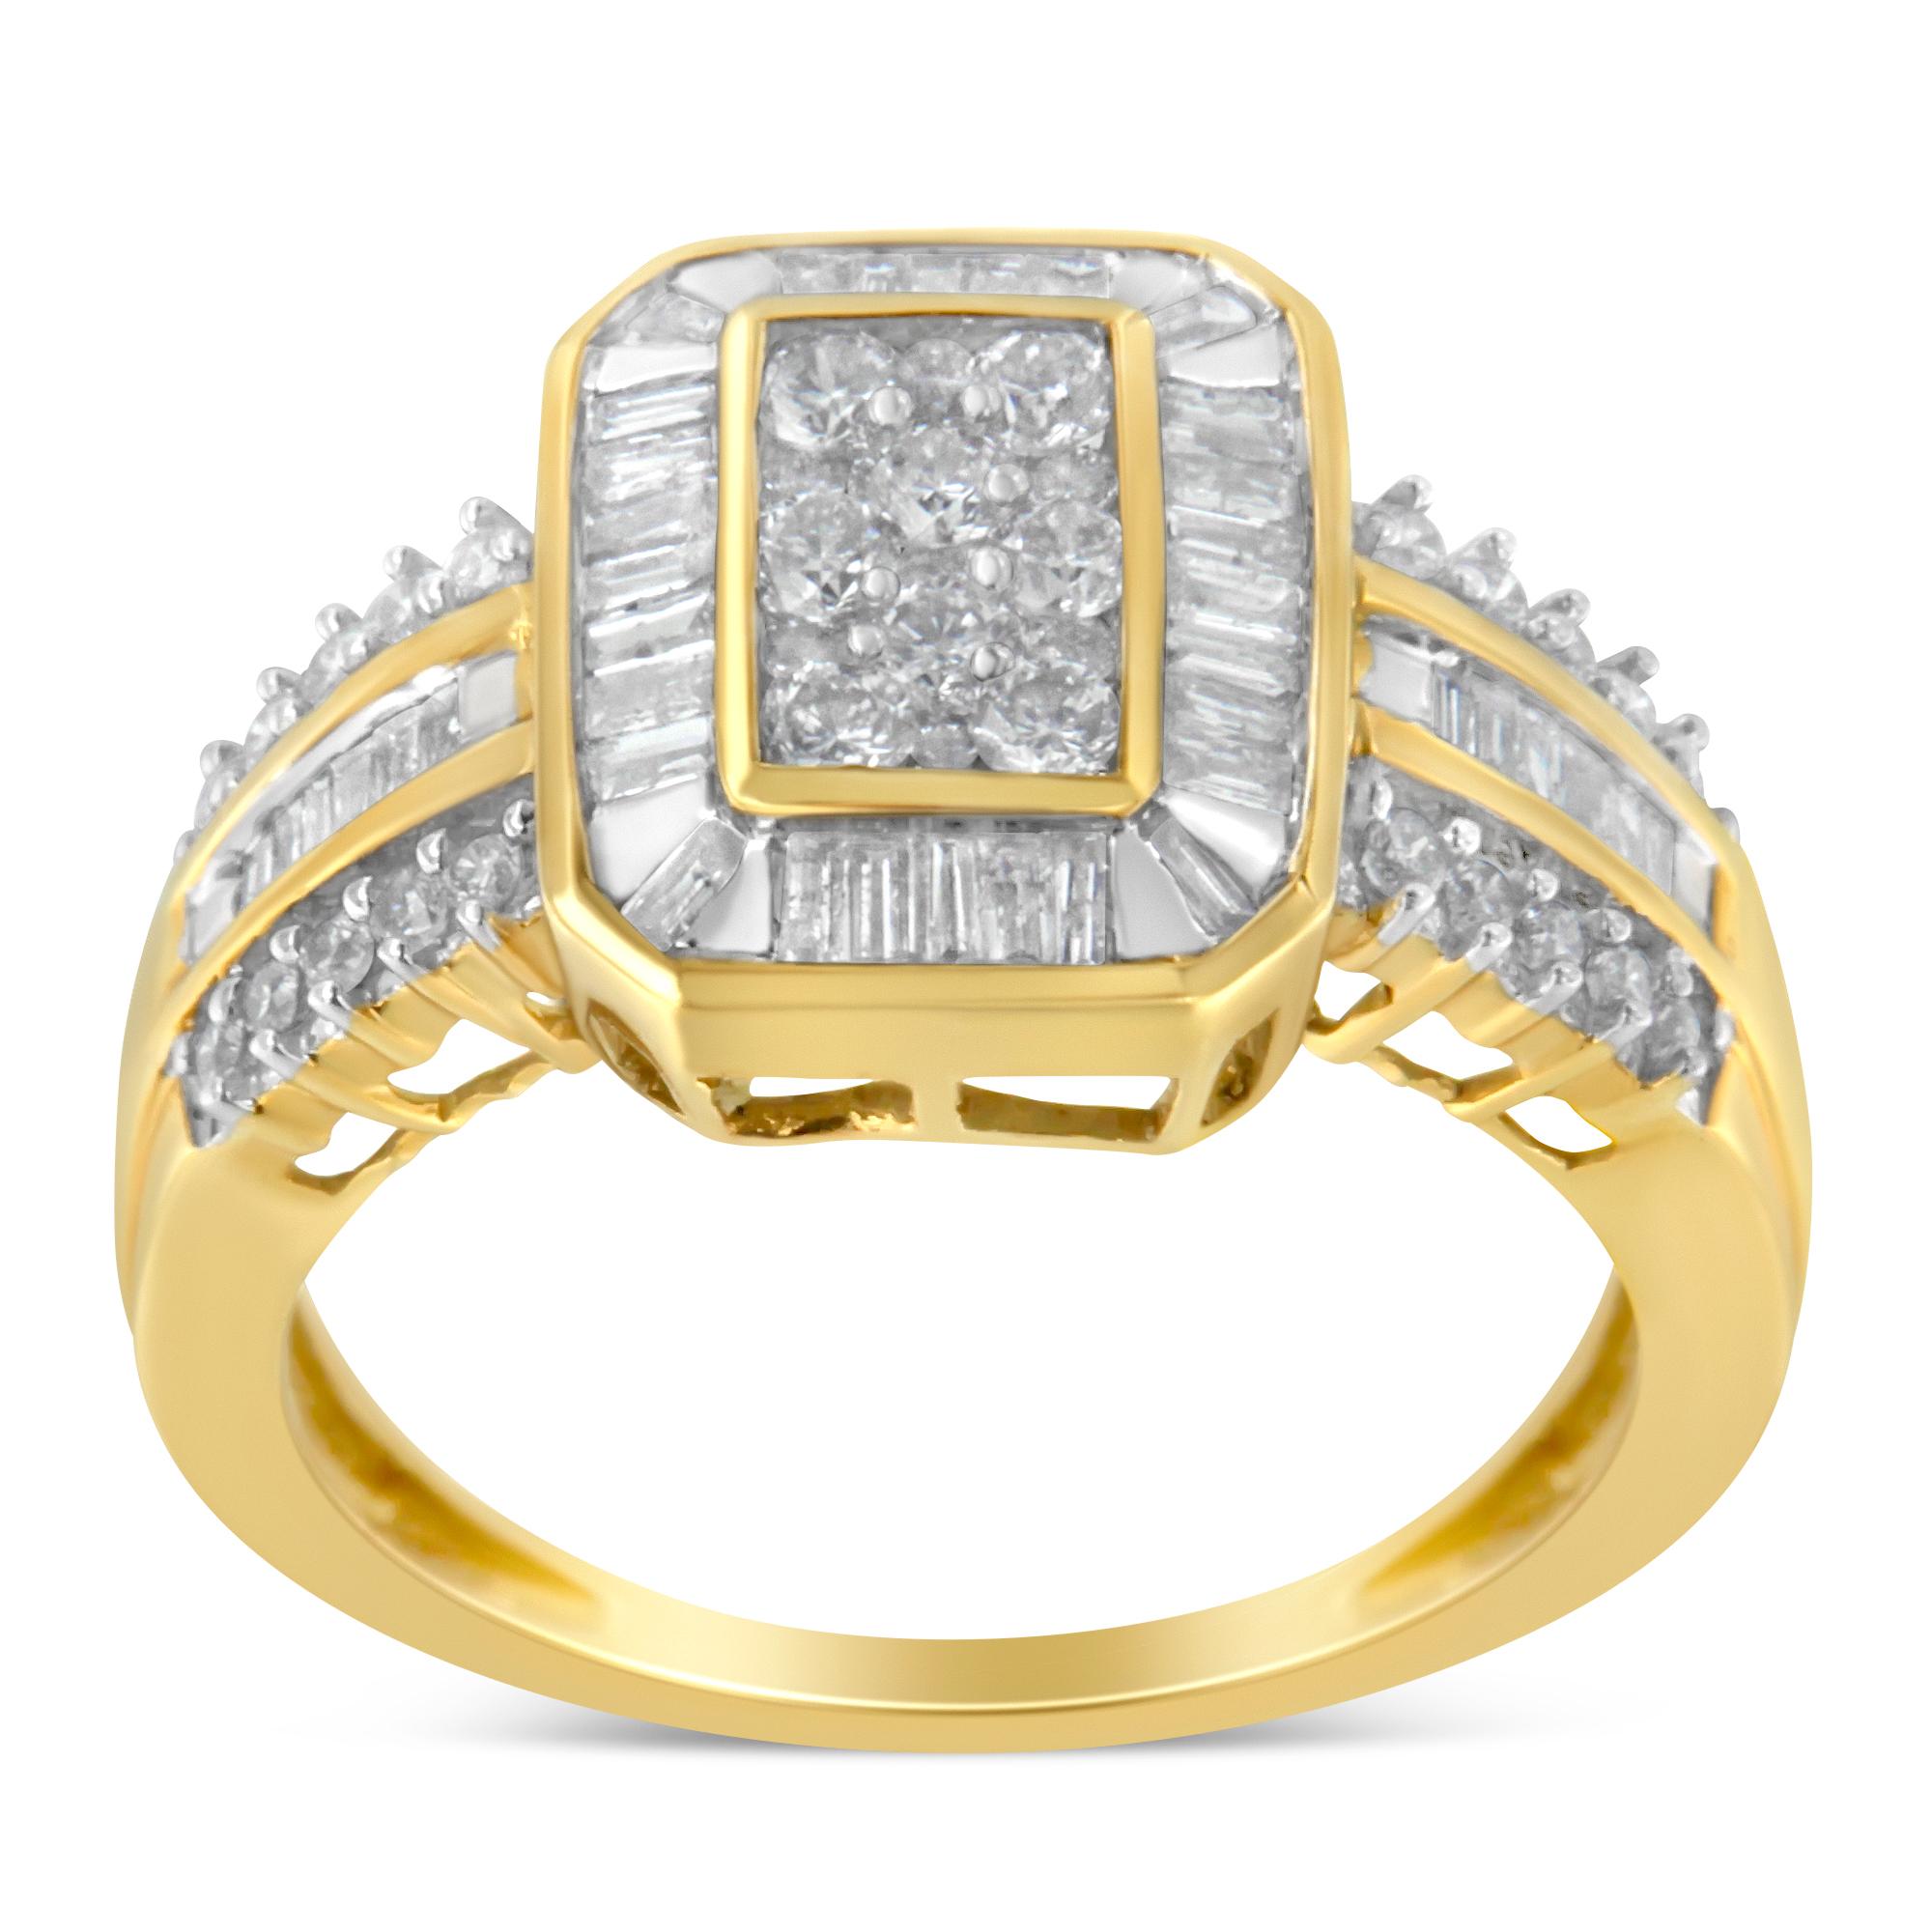 For Sale:  10K Yellow Gold 1.0 Carat Diamond Cocktail Ring 3